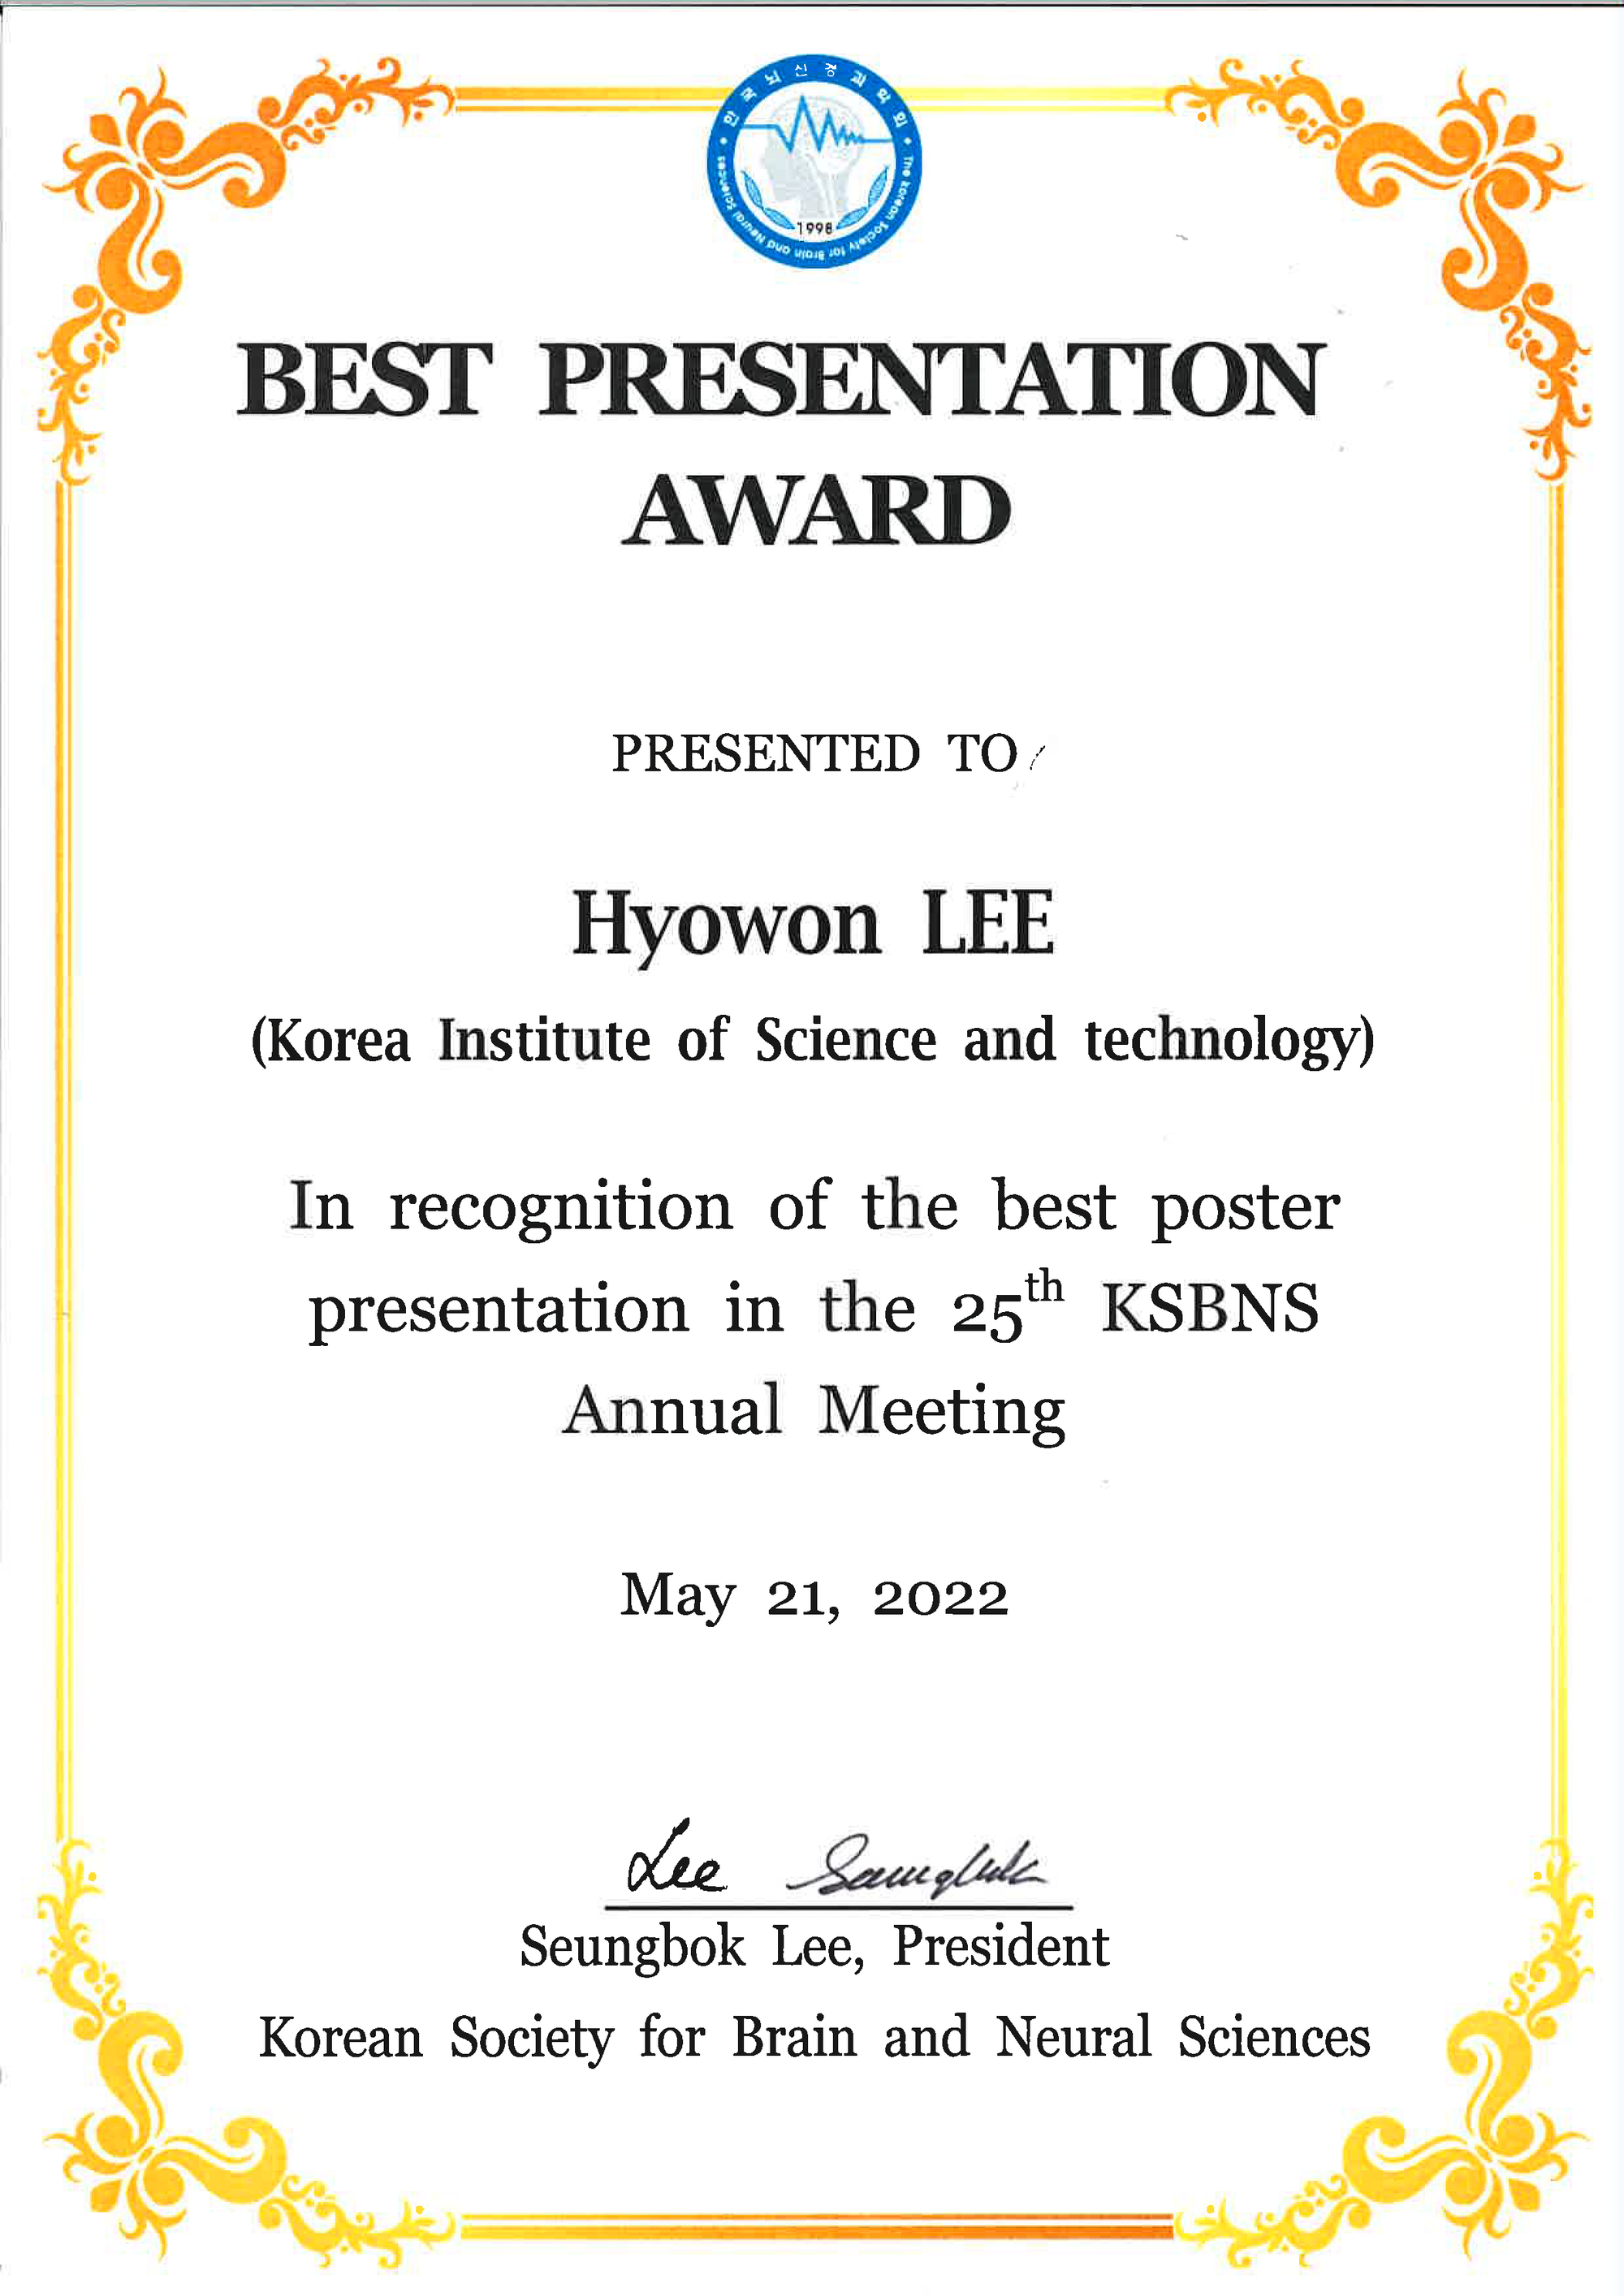 Dr. Ju and Hyowon received the best presentation awards in the poster session of KSBNS2022.